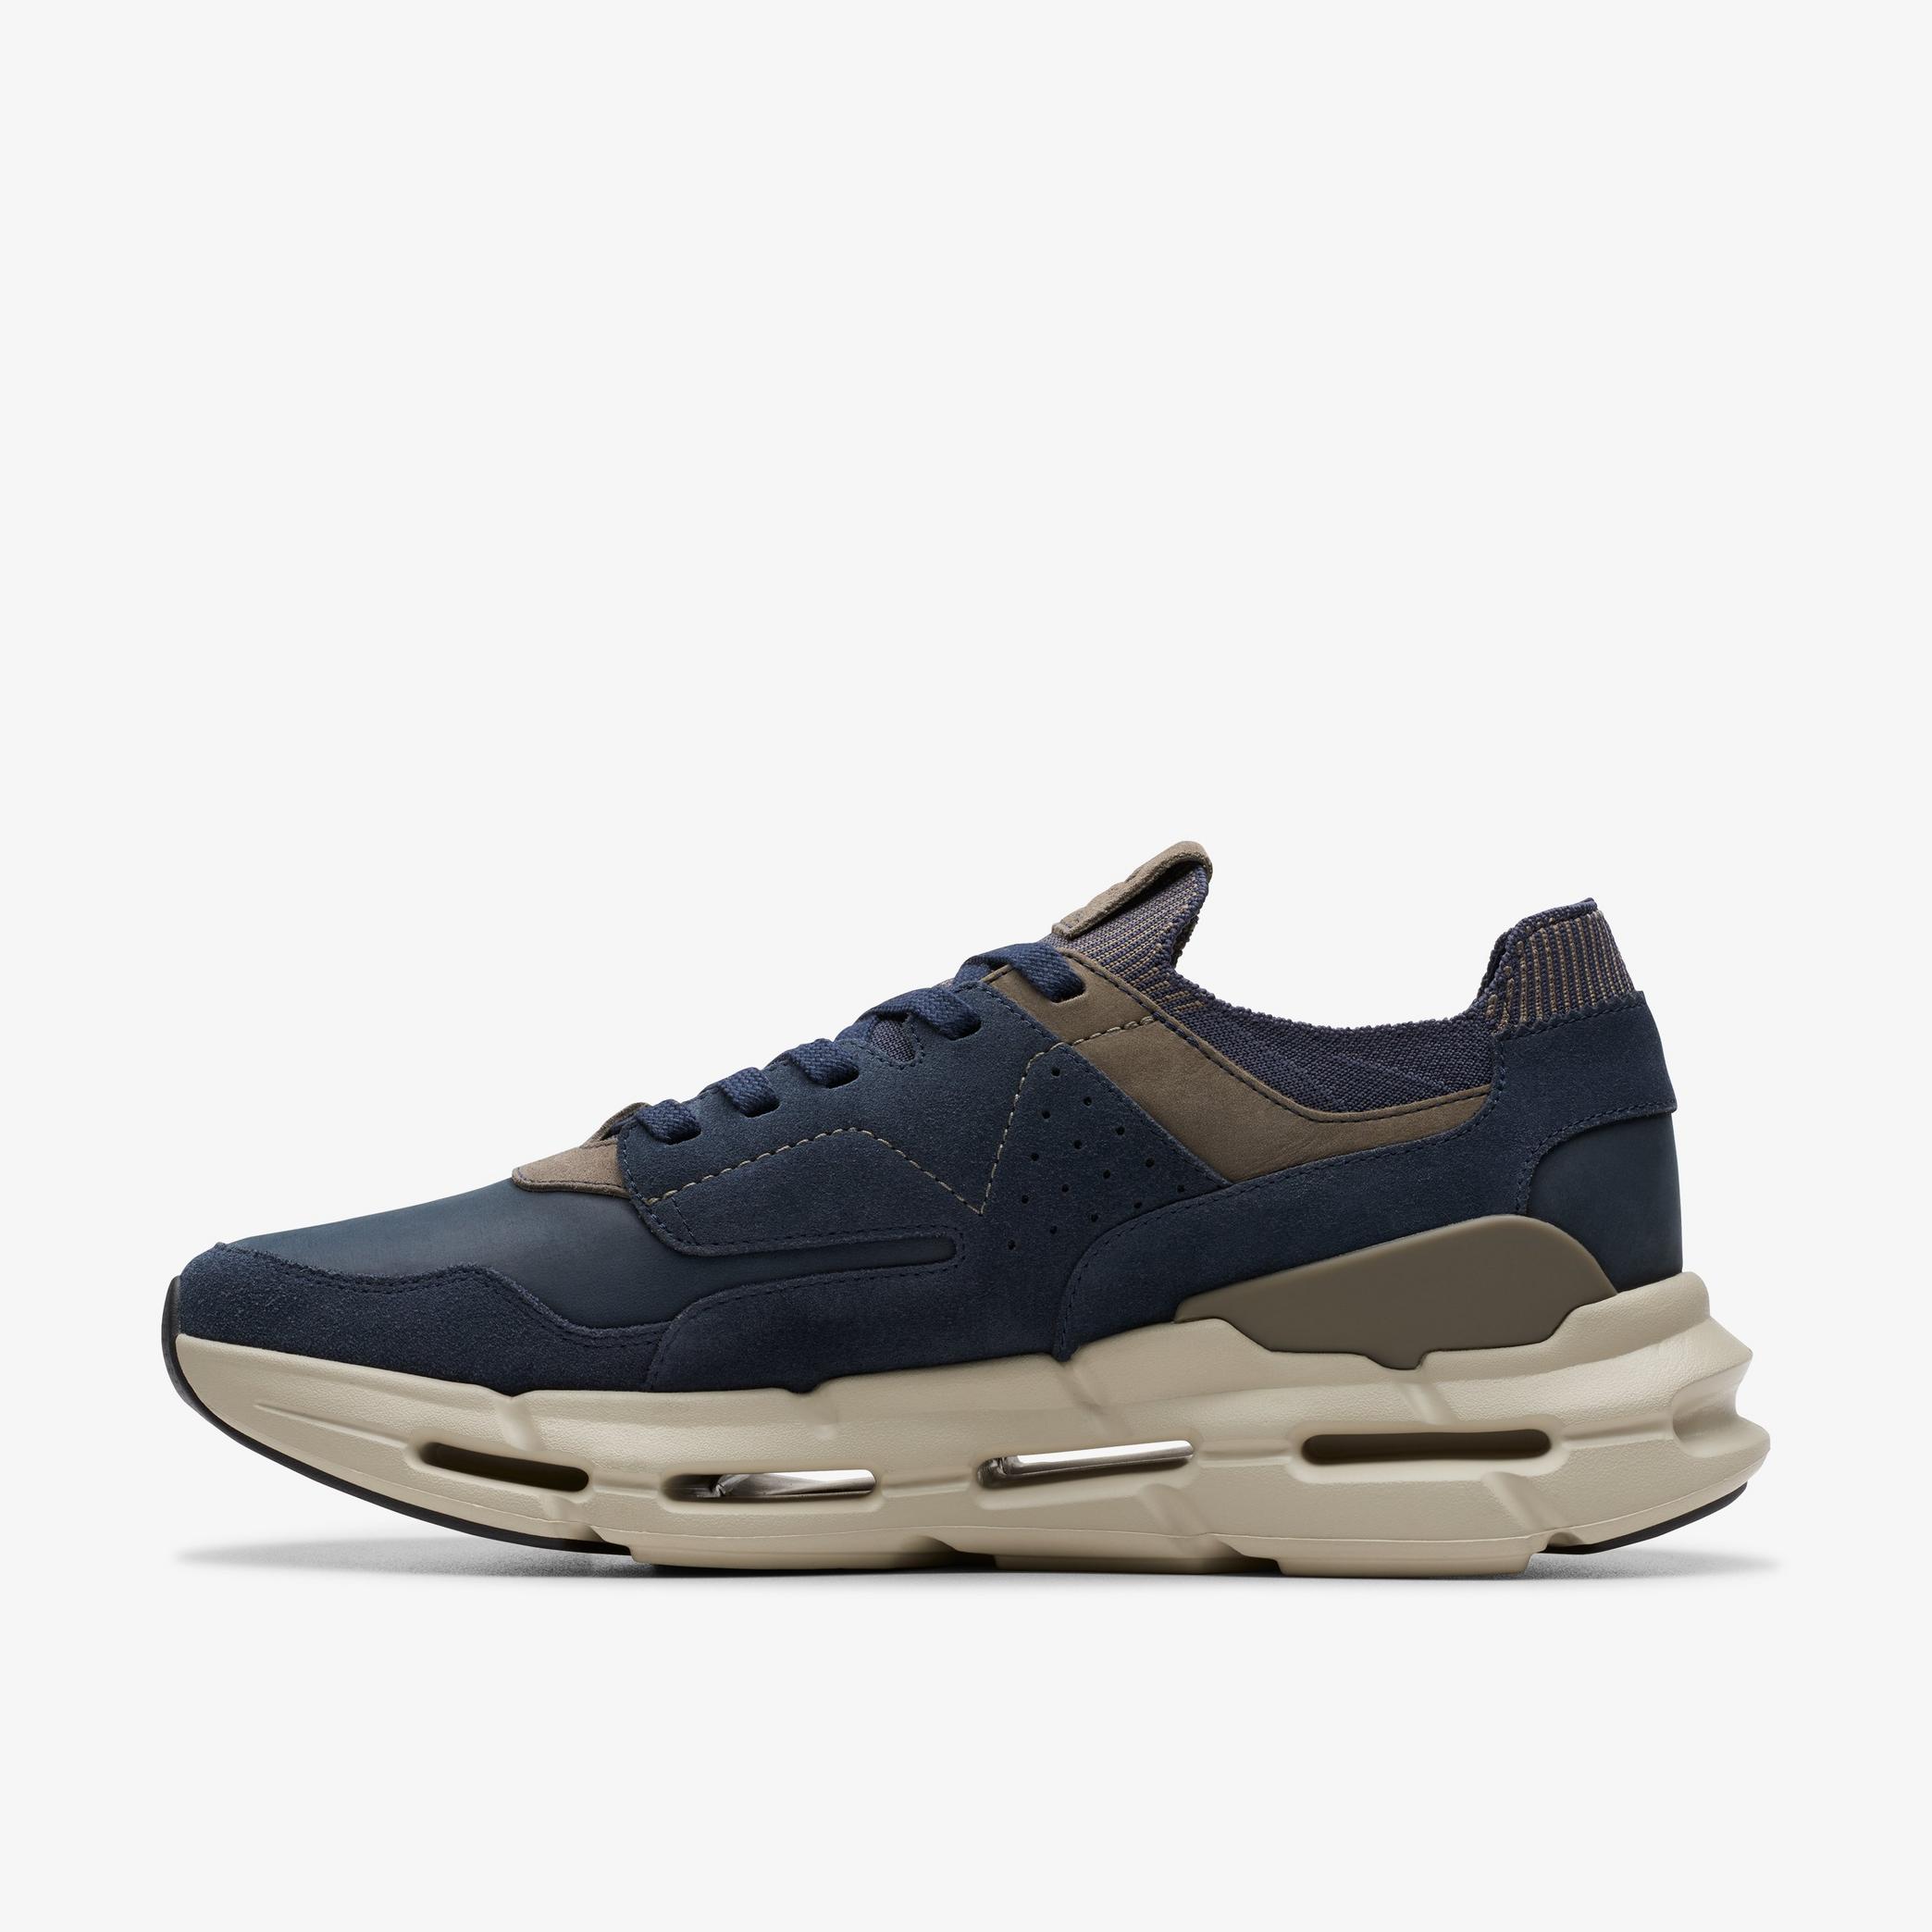 NXE Lo Navy Nubuck Shoes, view 2 of 7